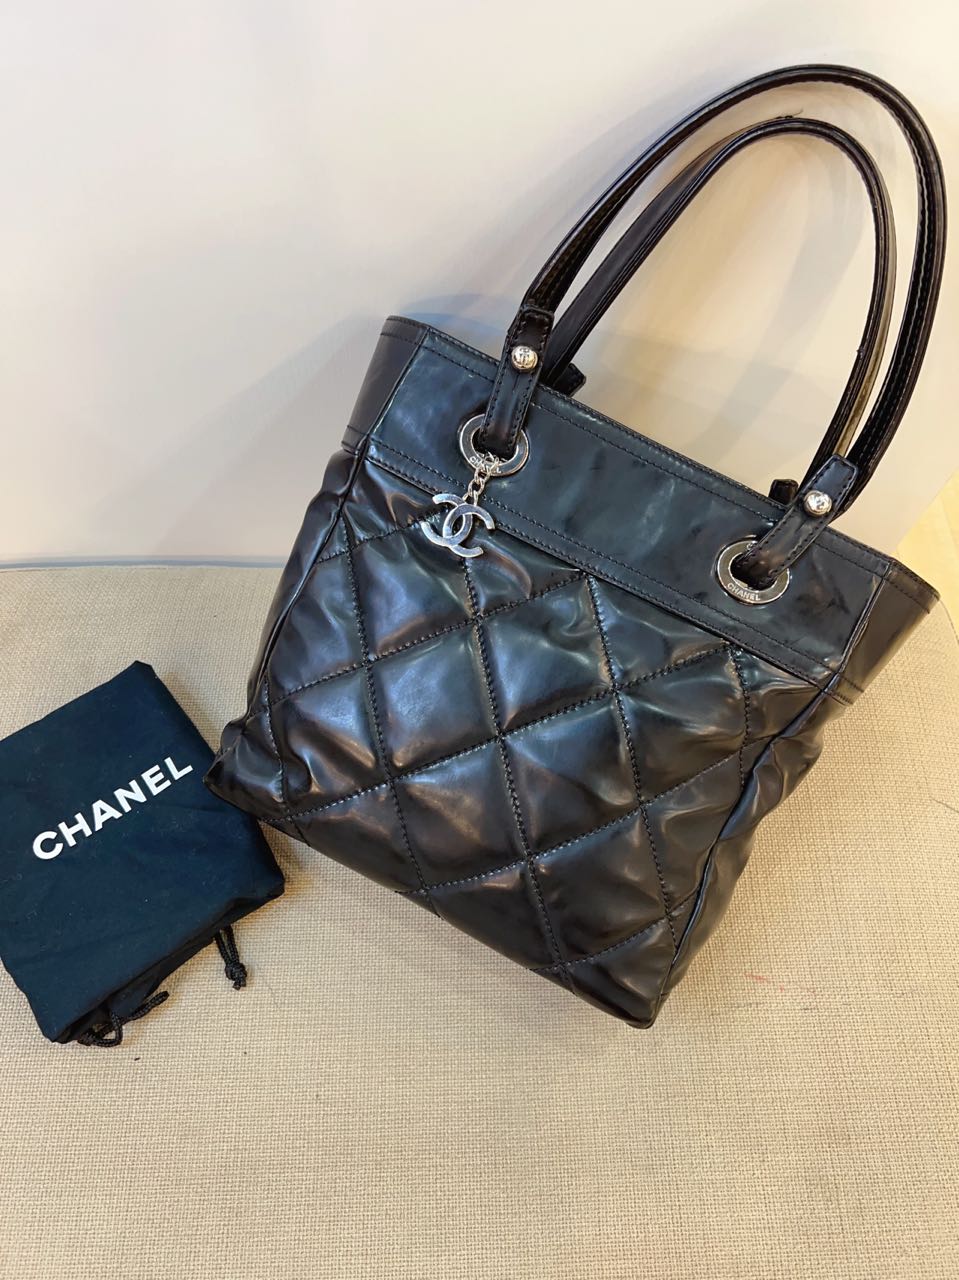 Chanel Black Quilted Leather Petite Paris Biarritz Shopping Tote Bag